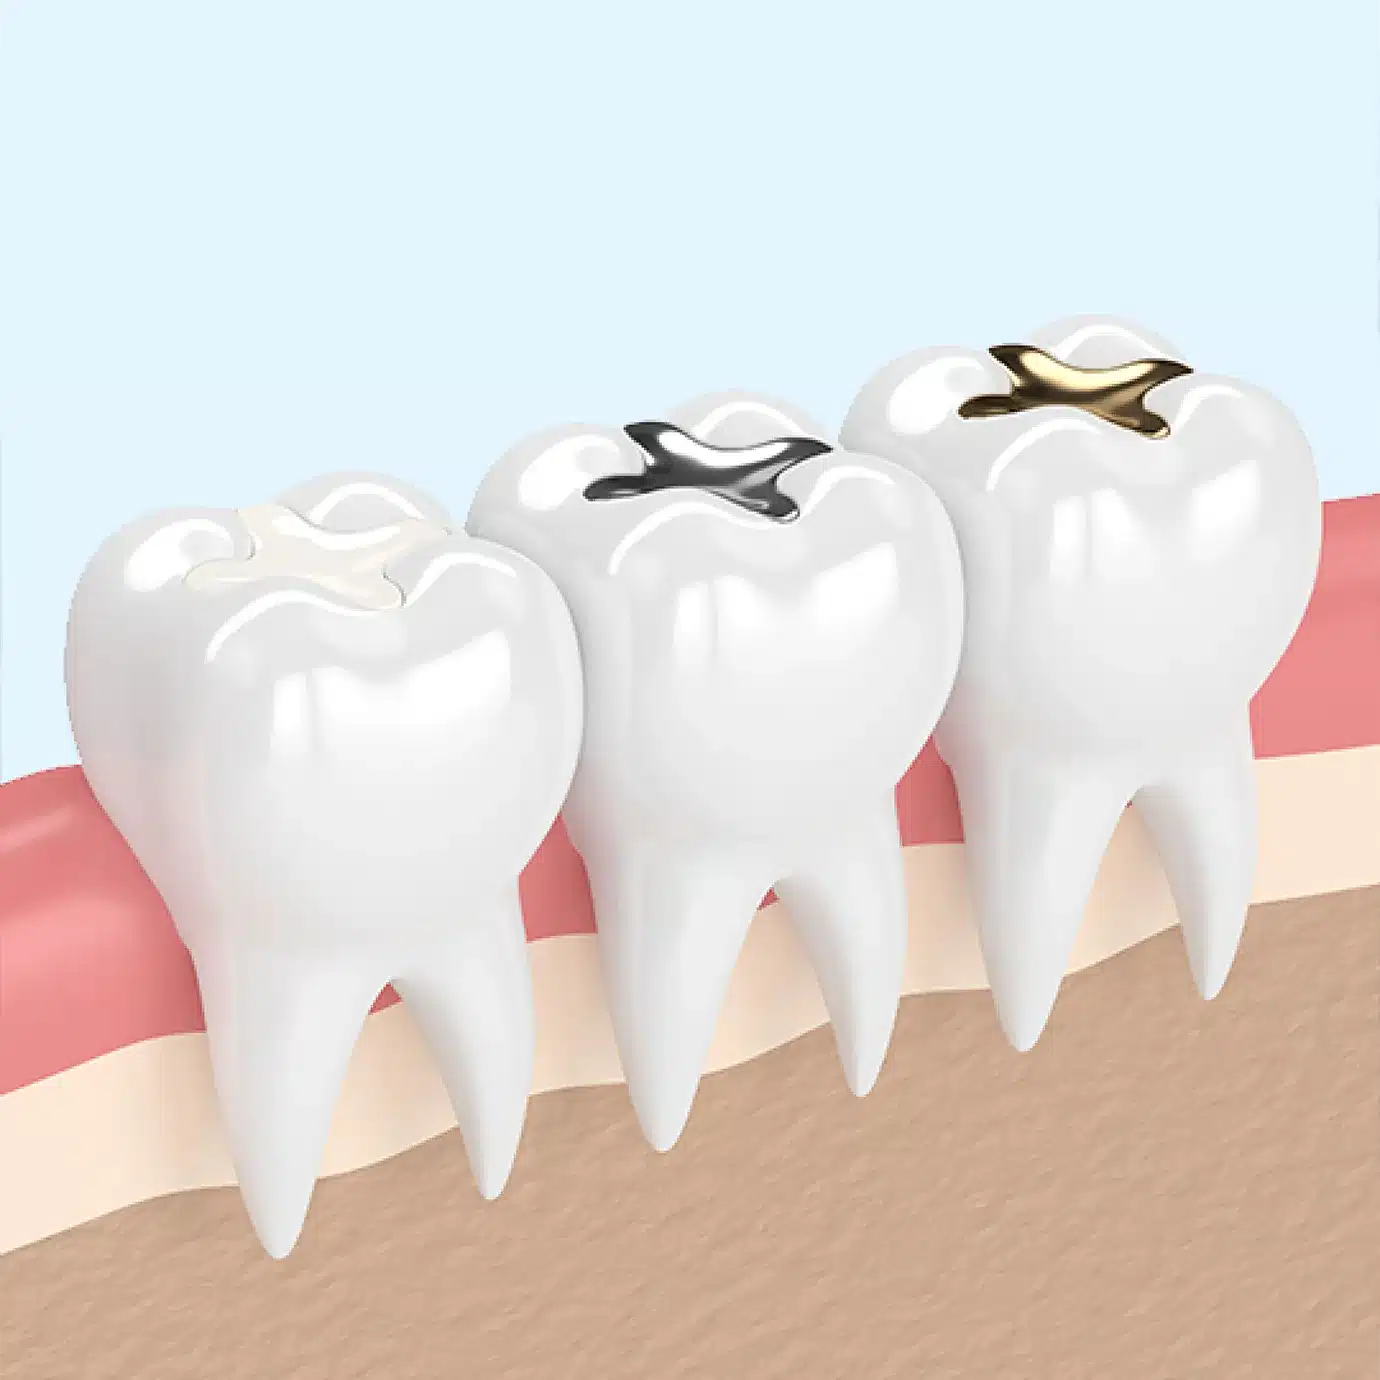 Silver Fillings vs White Fillings: What is Different?